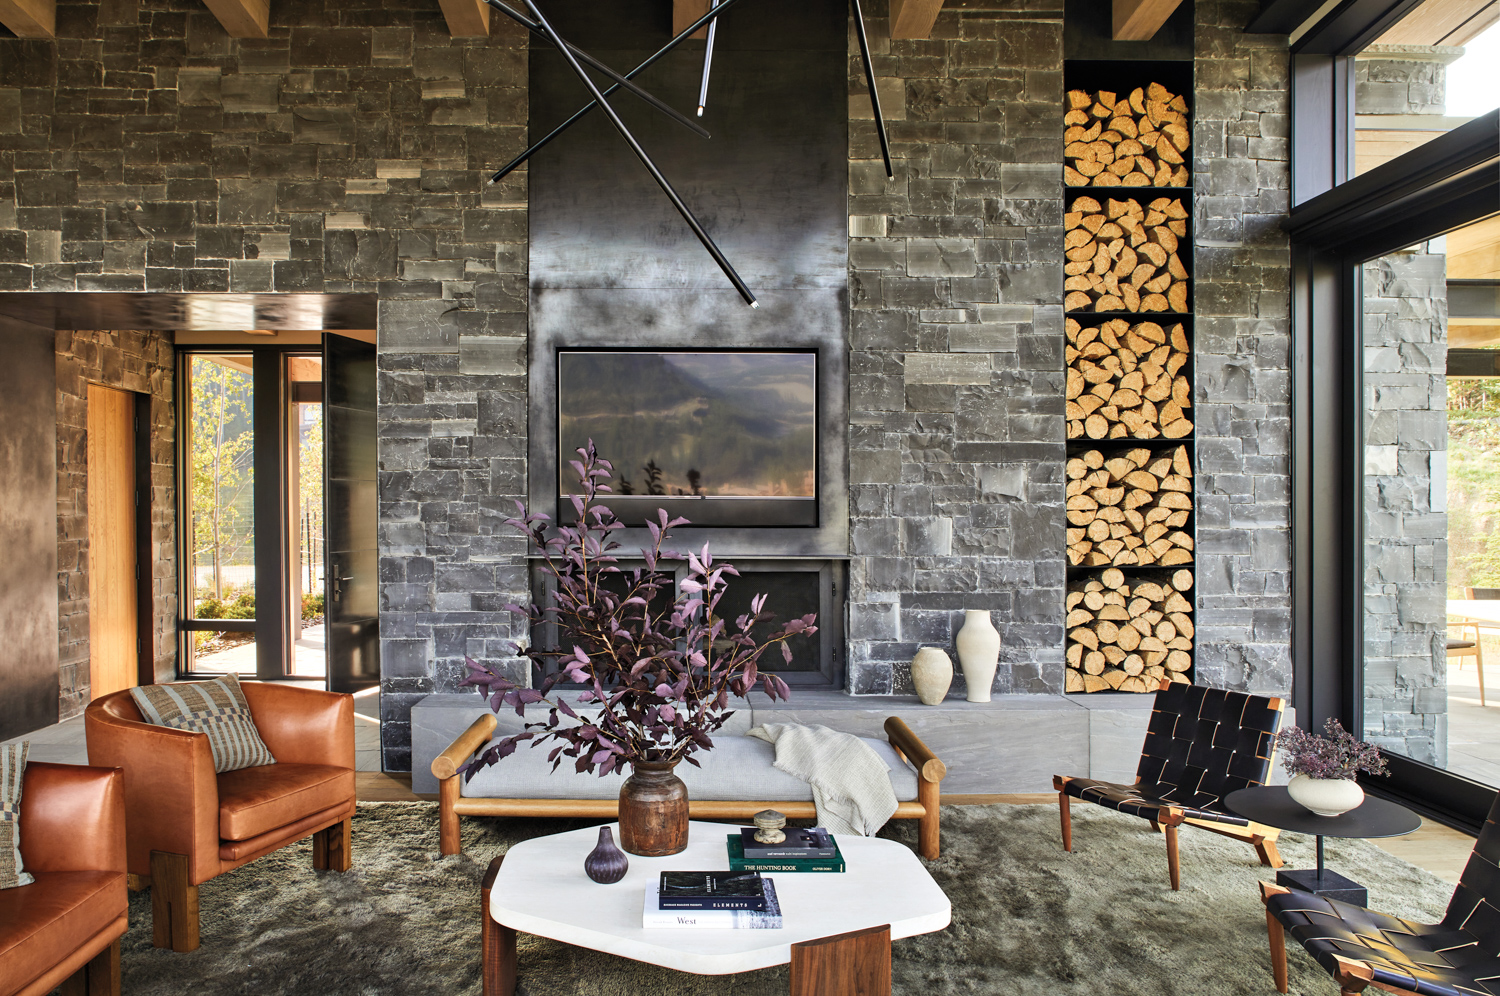 A fireplace is made of stone and metal.